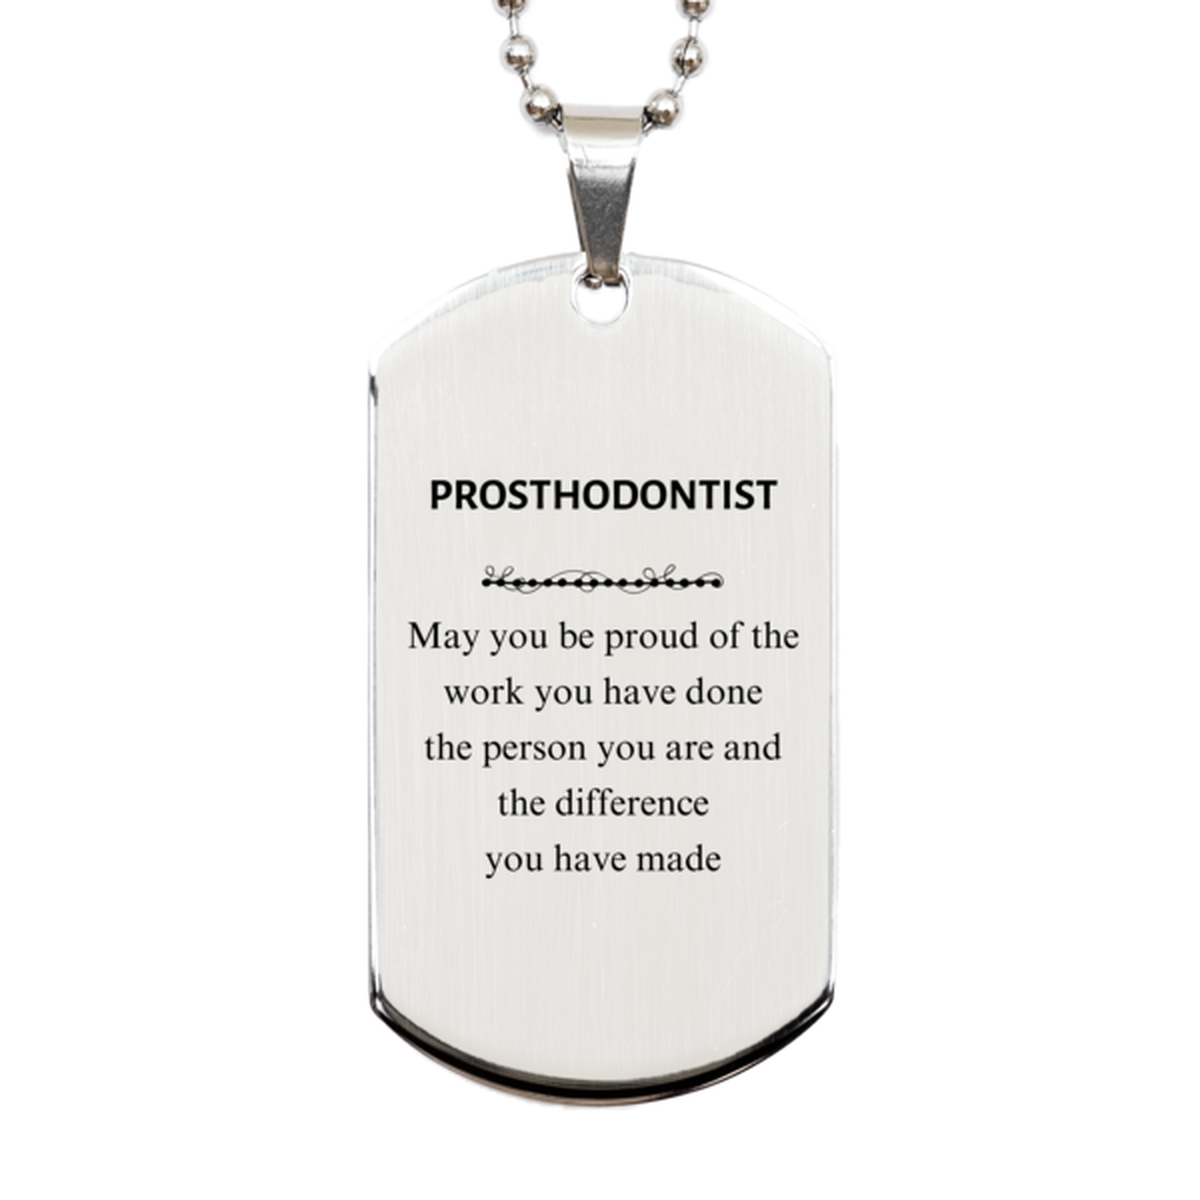 Prosthodontist May you be proud of the work you have done, Retirement Prosthodontist Silver Dog Tag for Colleague Appreciation Gifts Amazing for Prosthodontist